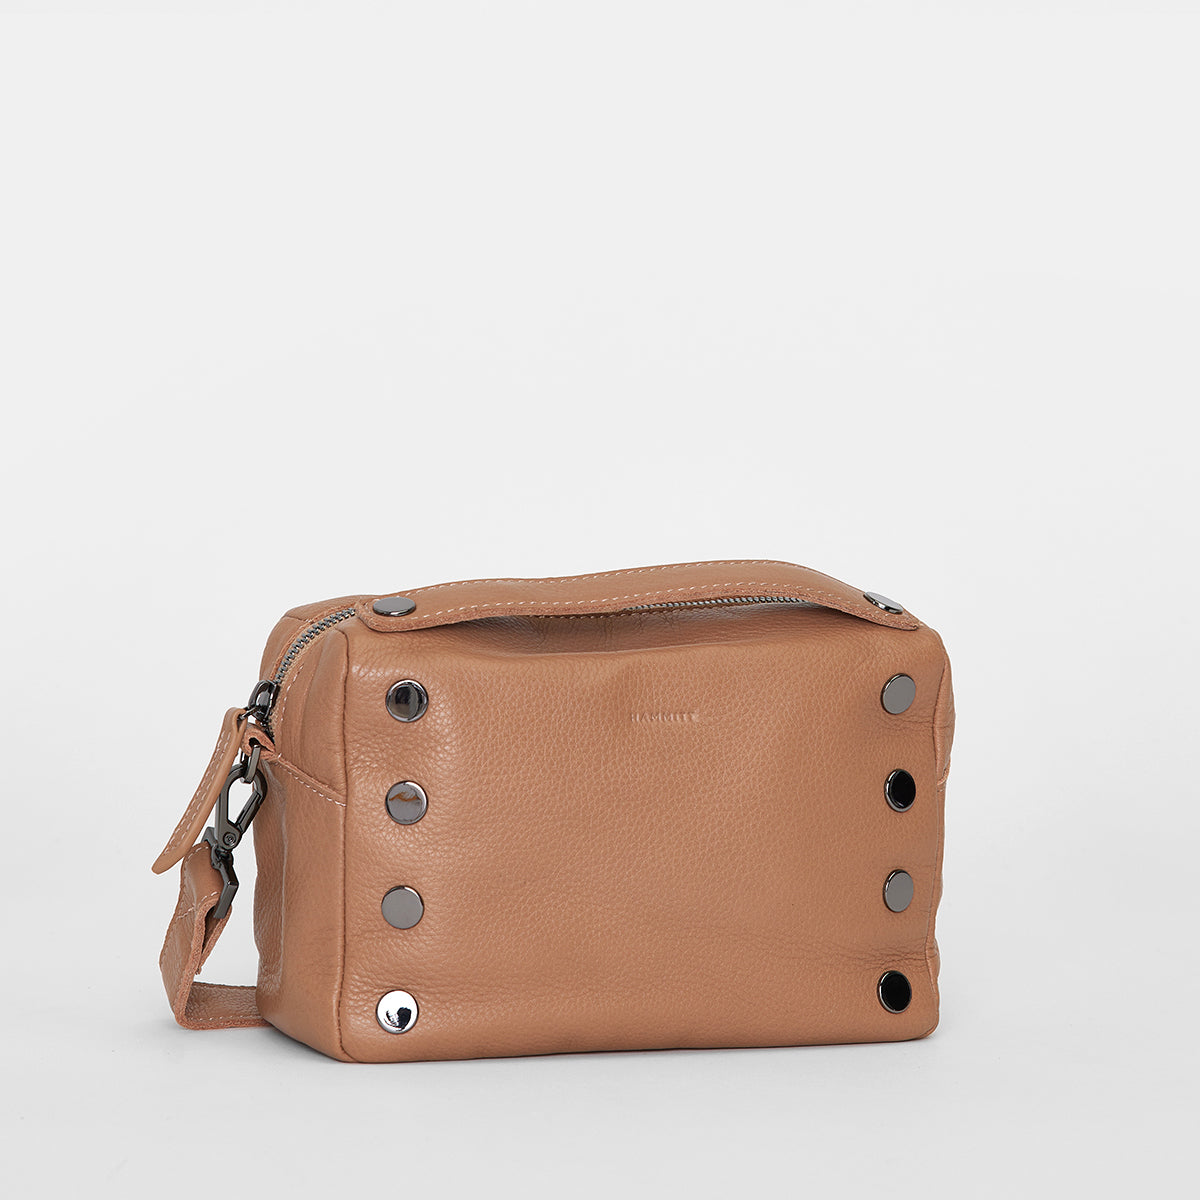 AVENUE XBODY E/W, Tan Croc-Embossed Leather Cross Body Bag, Autumn  Collection